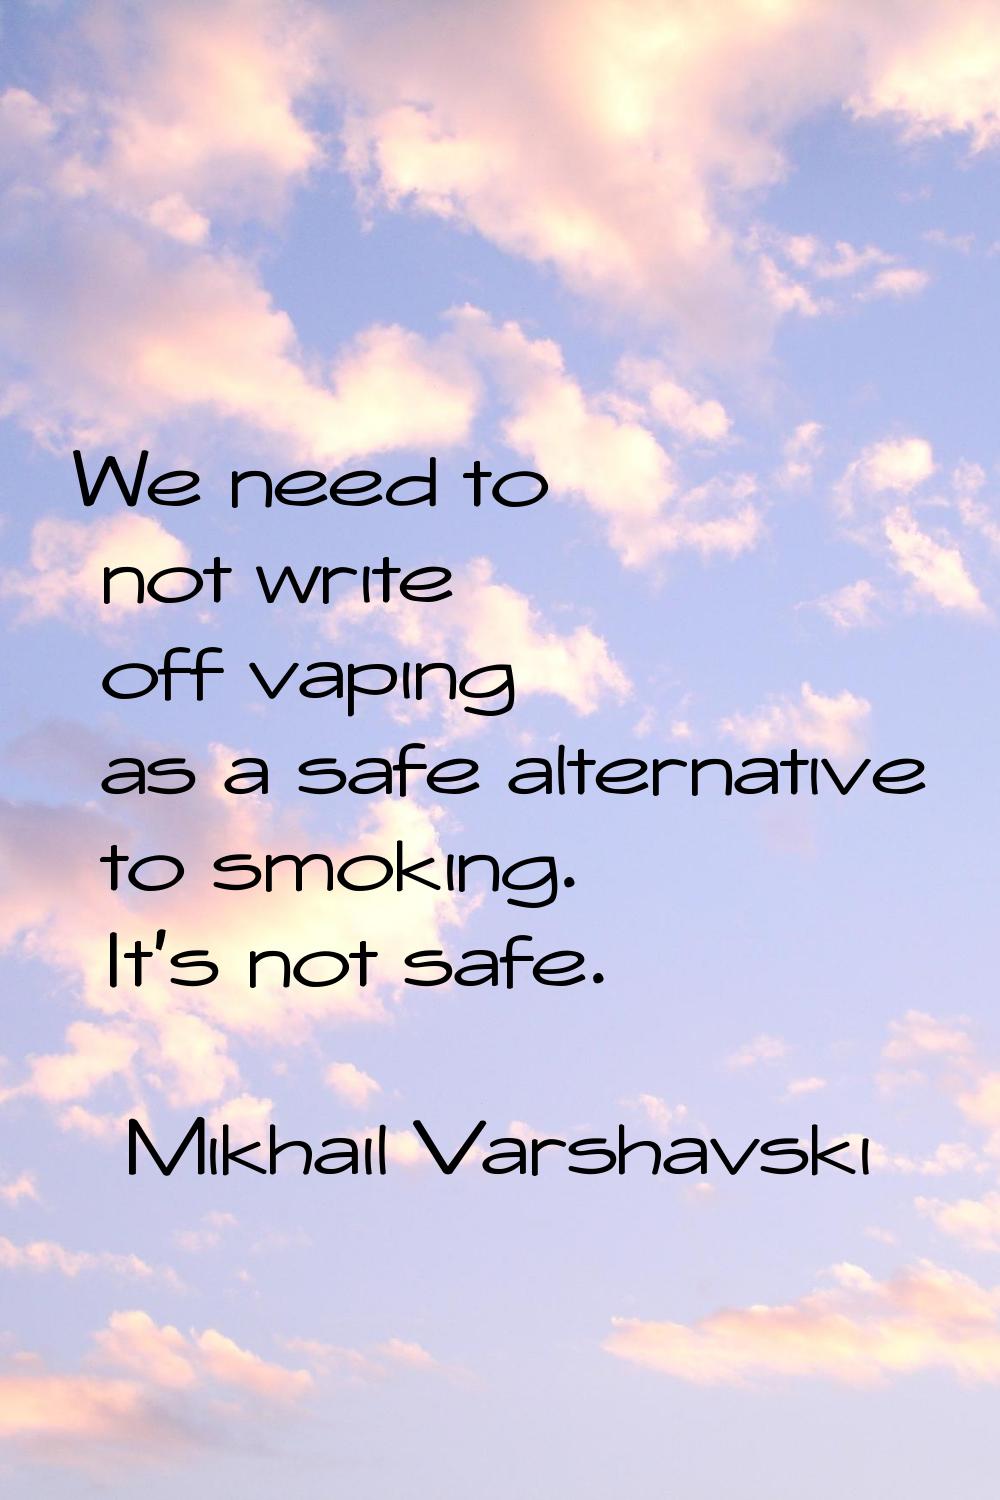 We need to not write off vaping as a safe alternative to smoking. It's not safe.